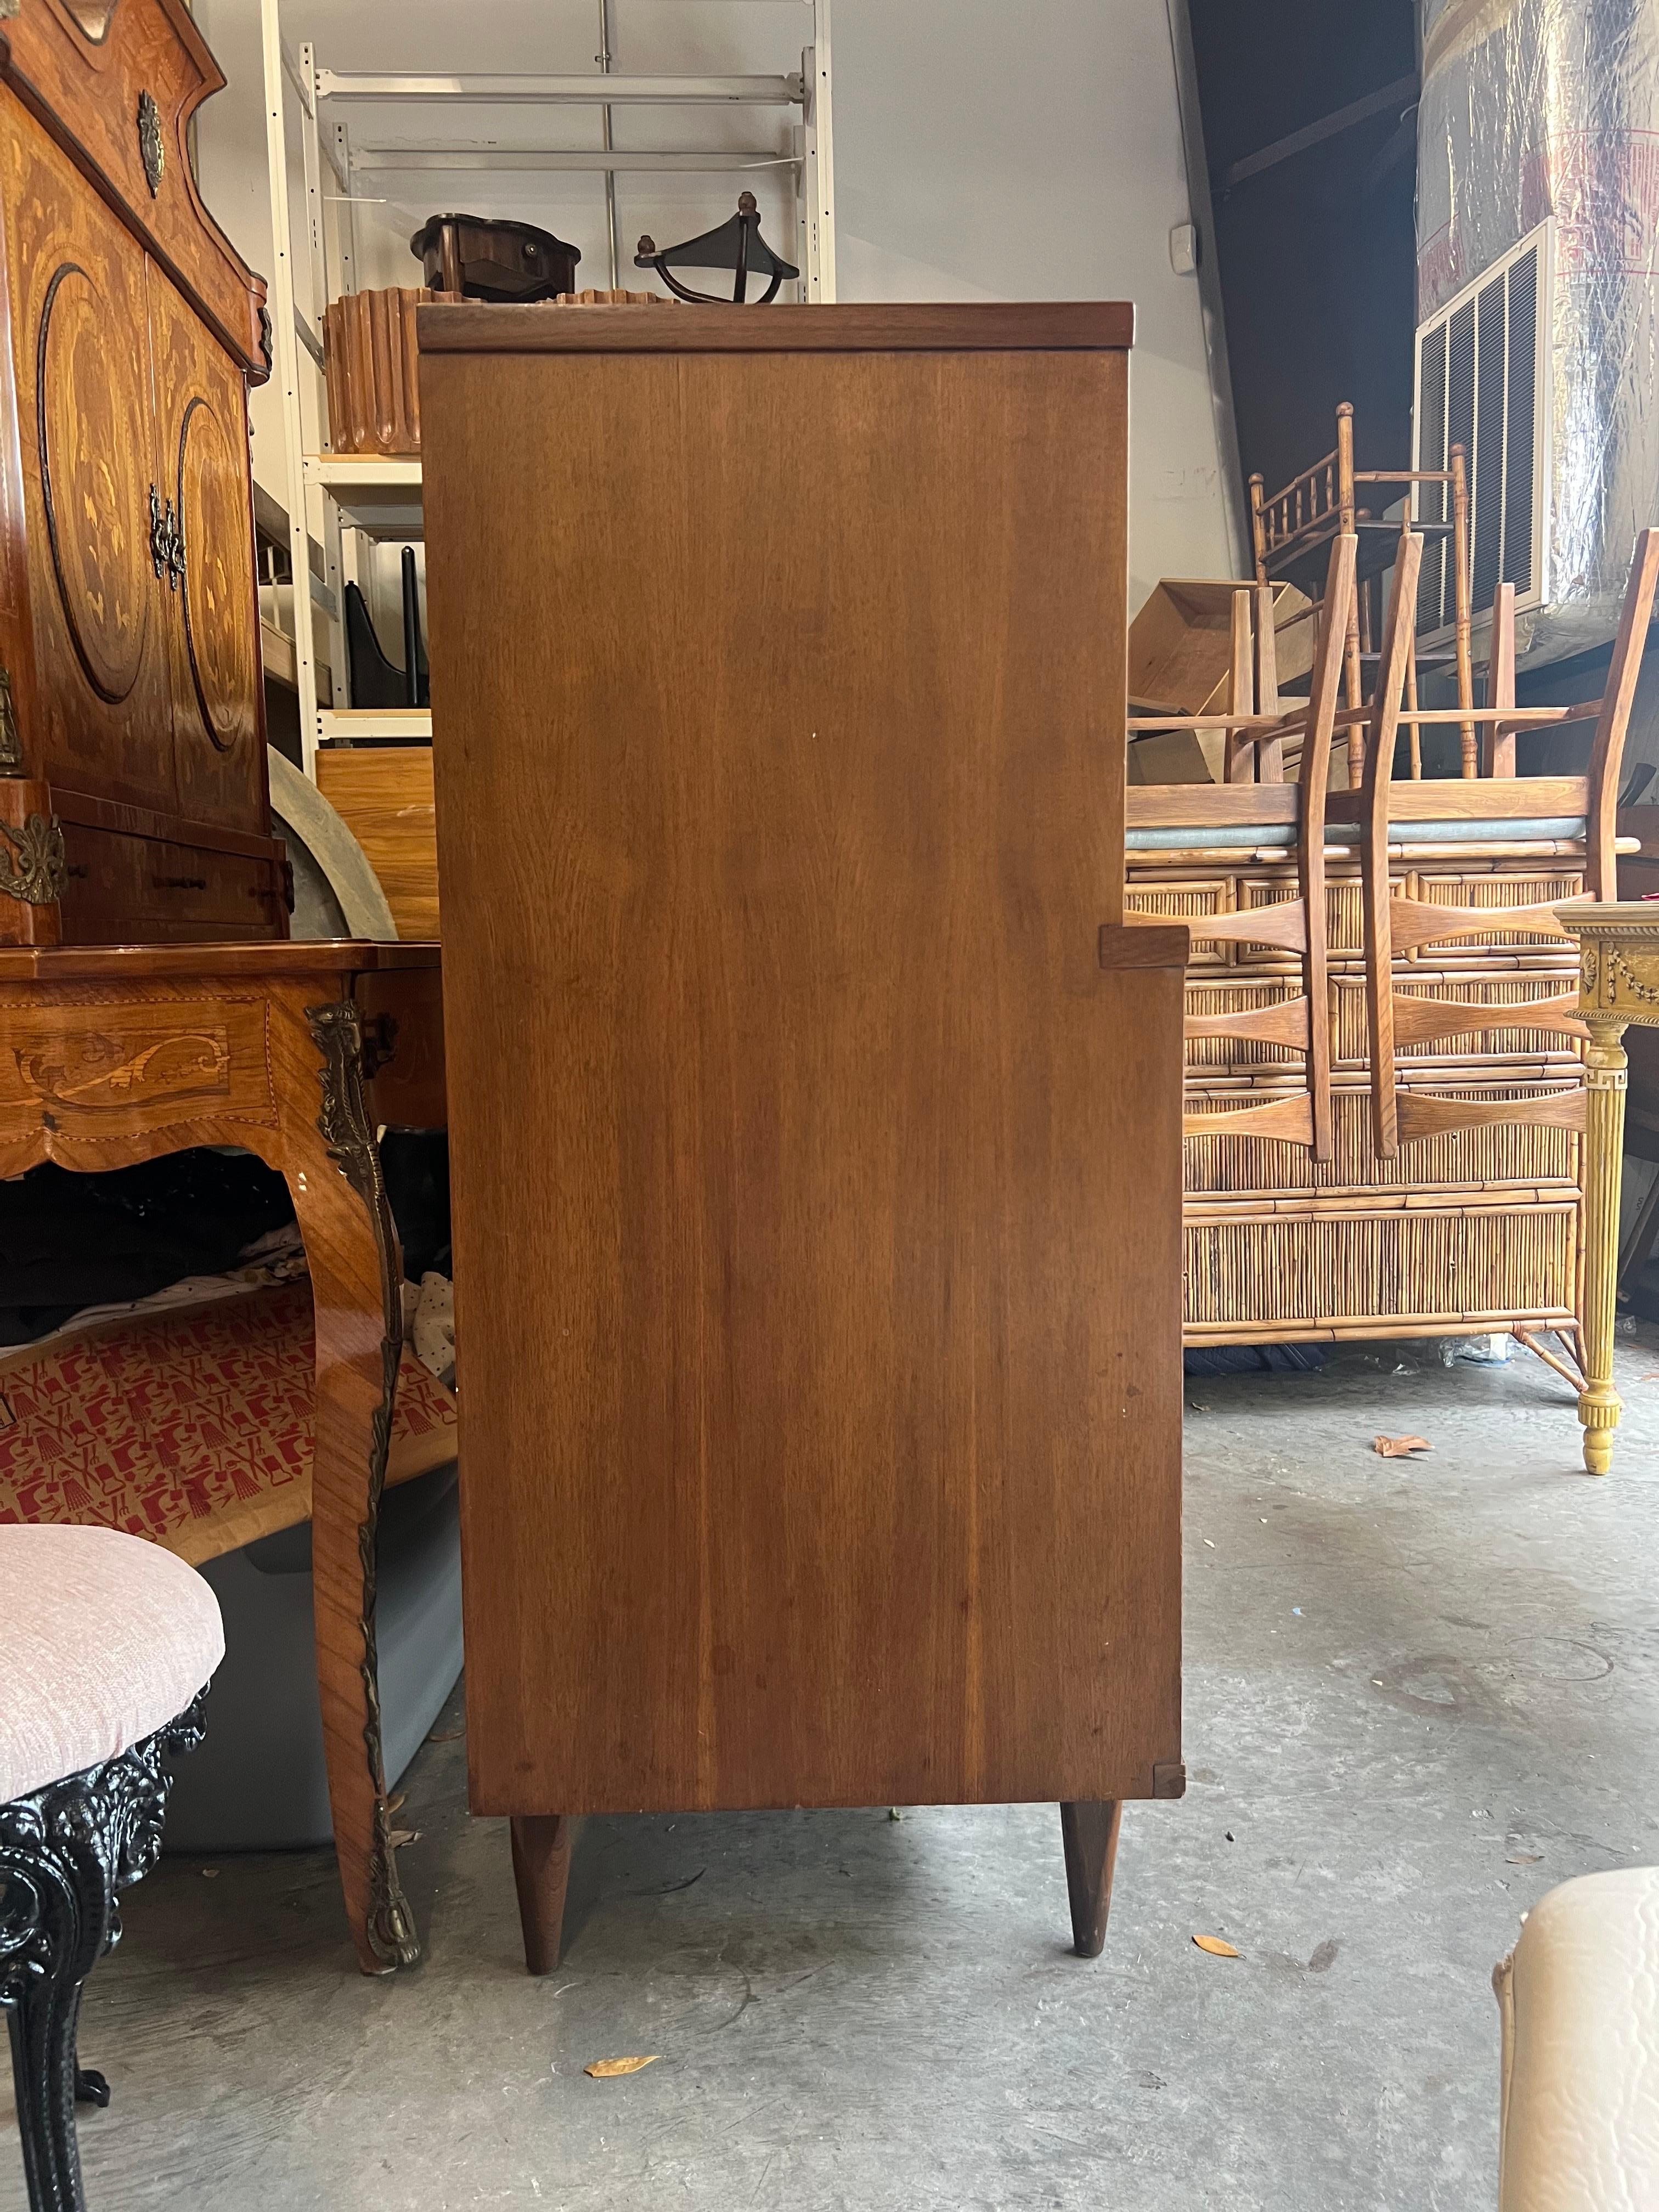 This beautiful mid-century highboy features the stunning design manufacturer Kent Coffey was so well known for. This piece for the Tableau furniture line features inlaid metal drawer pulls, sturdy hardwood construction, and stylish tapered legs.